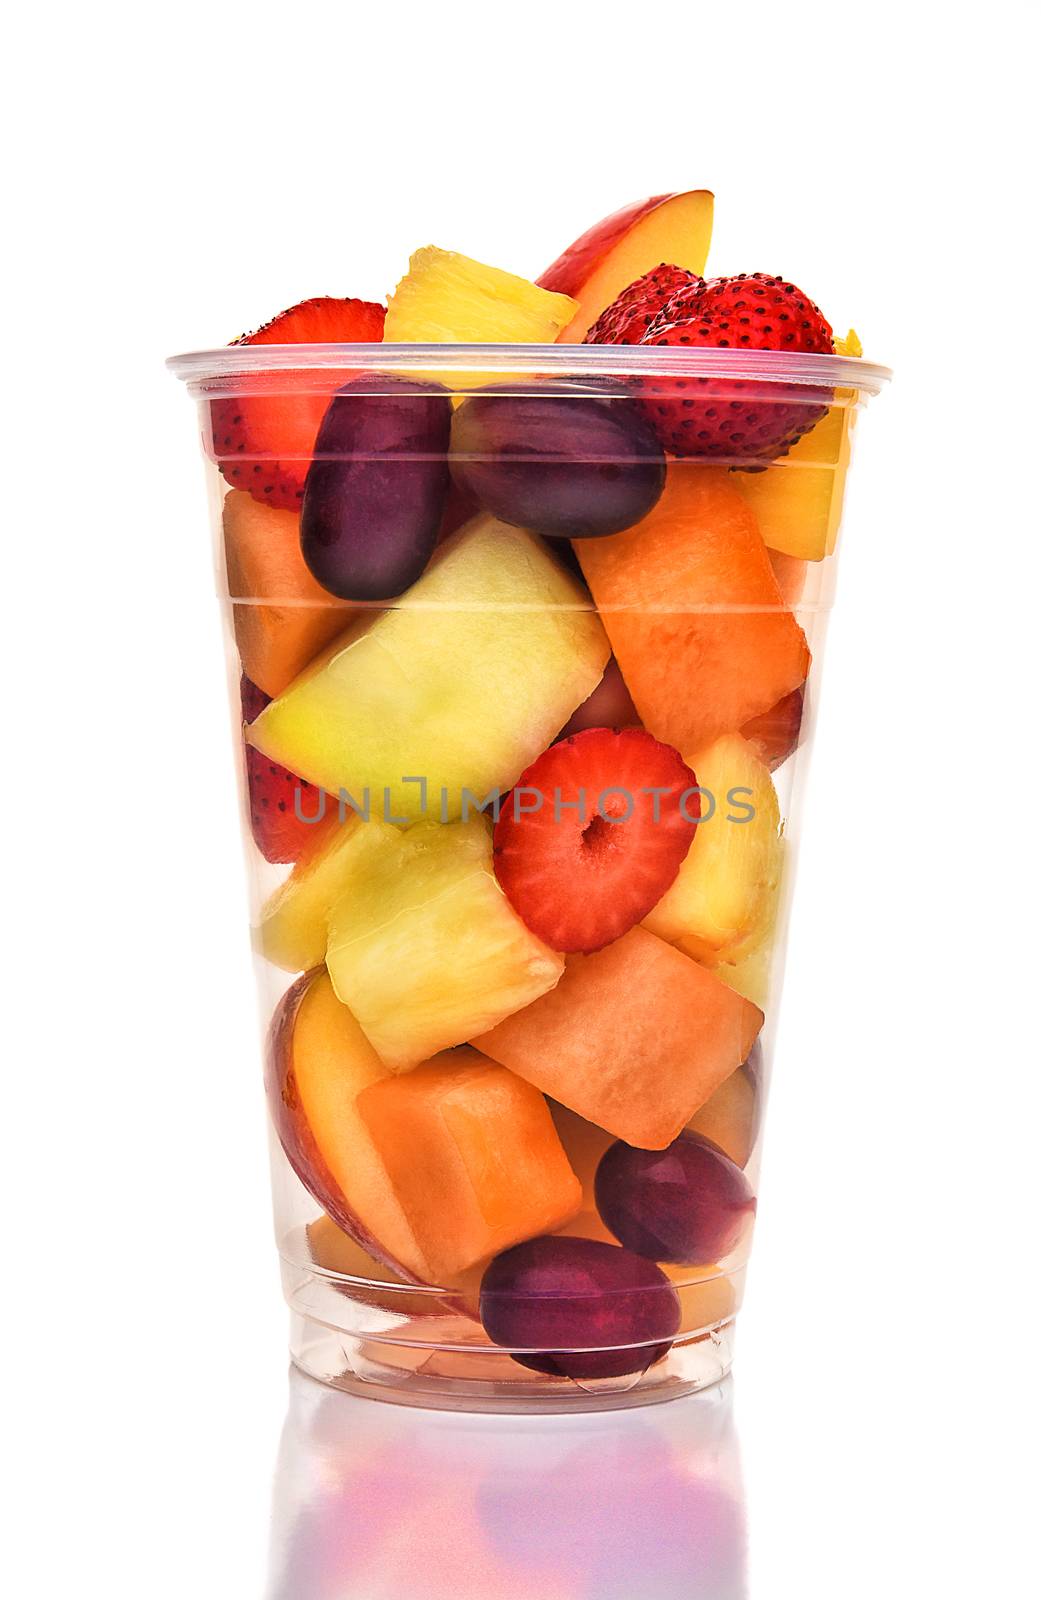 A plastic cup of fresh cut fruit. Isolated on white with reflection, fruits include, Strawberry, Pineapple, Apple, Cantaloupe, Honeydew and Grapes.